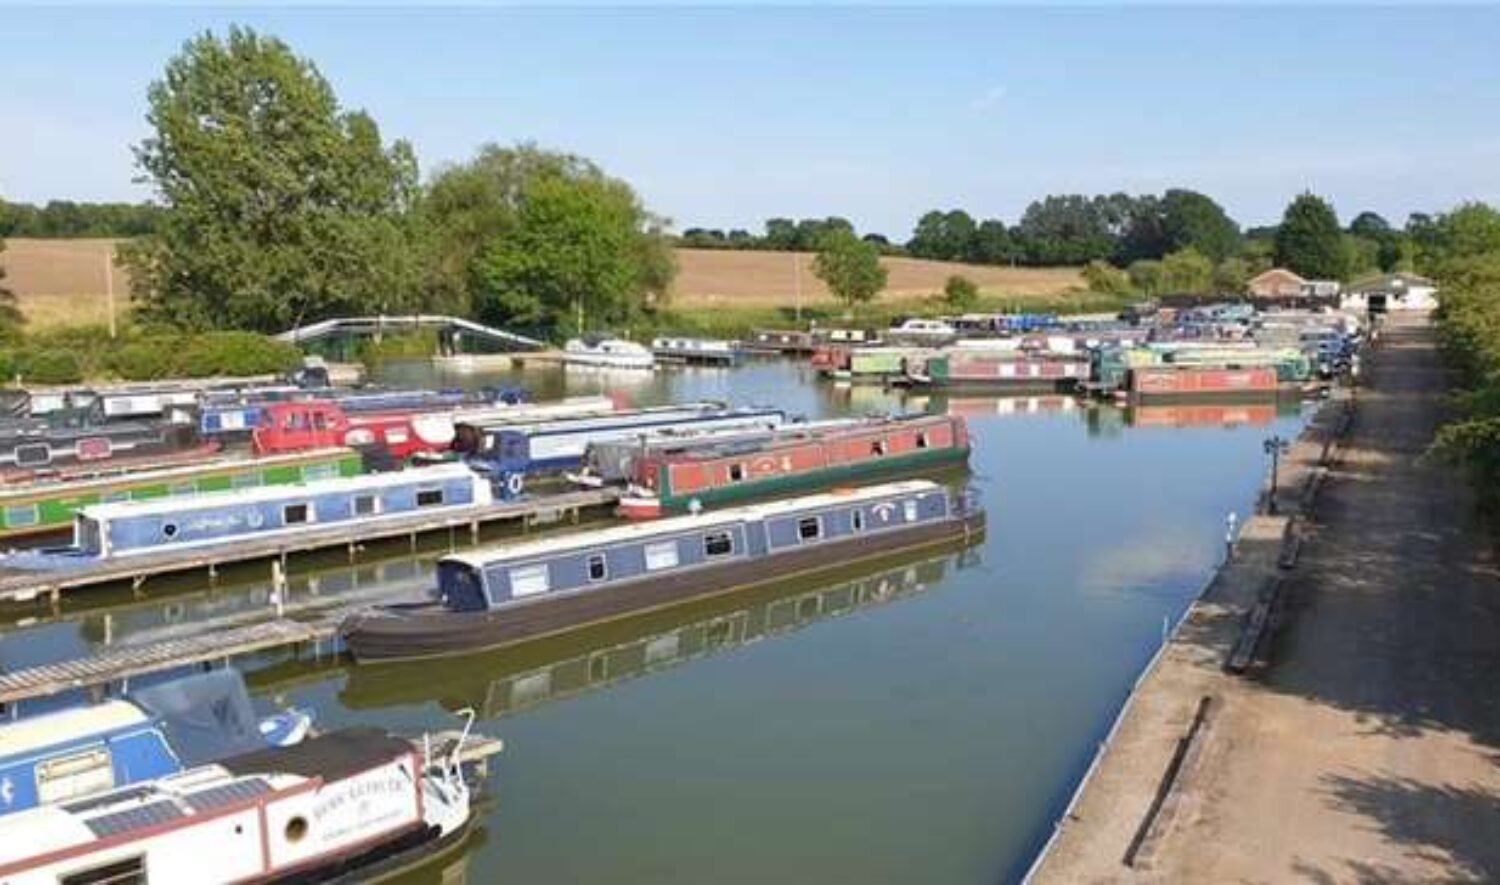 A Warwickshire canal marina has sold for more than £1 million to Crafted Boats Ltd, a day before it was due to go to auction, after ‘multiple enquiries and competitive offers'